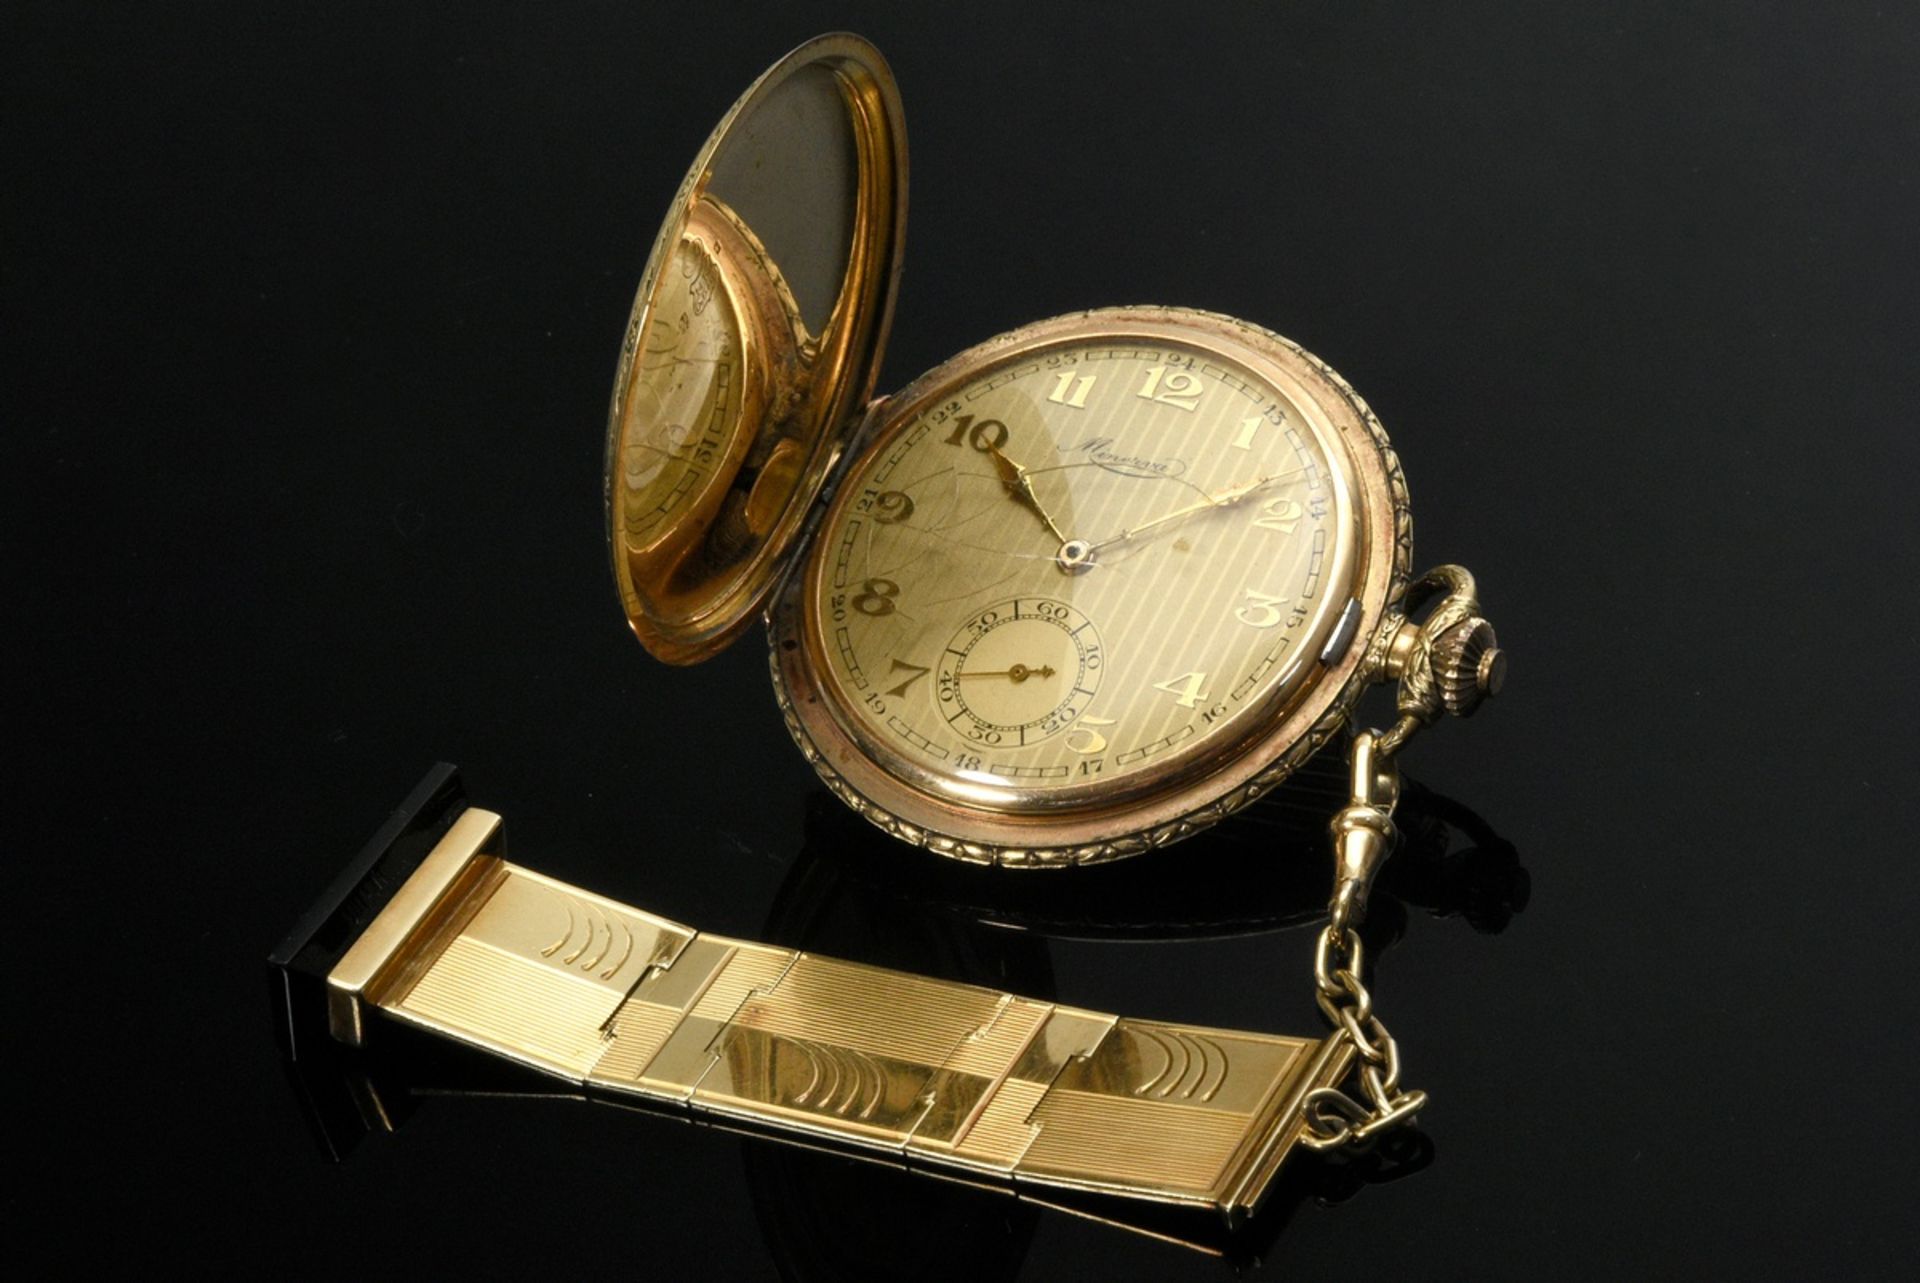 Three-cover yellow gold 585 Minerva pocket watch, lever movement, gilded dial, arabic numerals, sma - Image 4 of 9